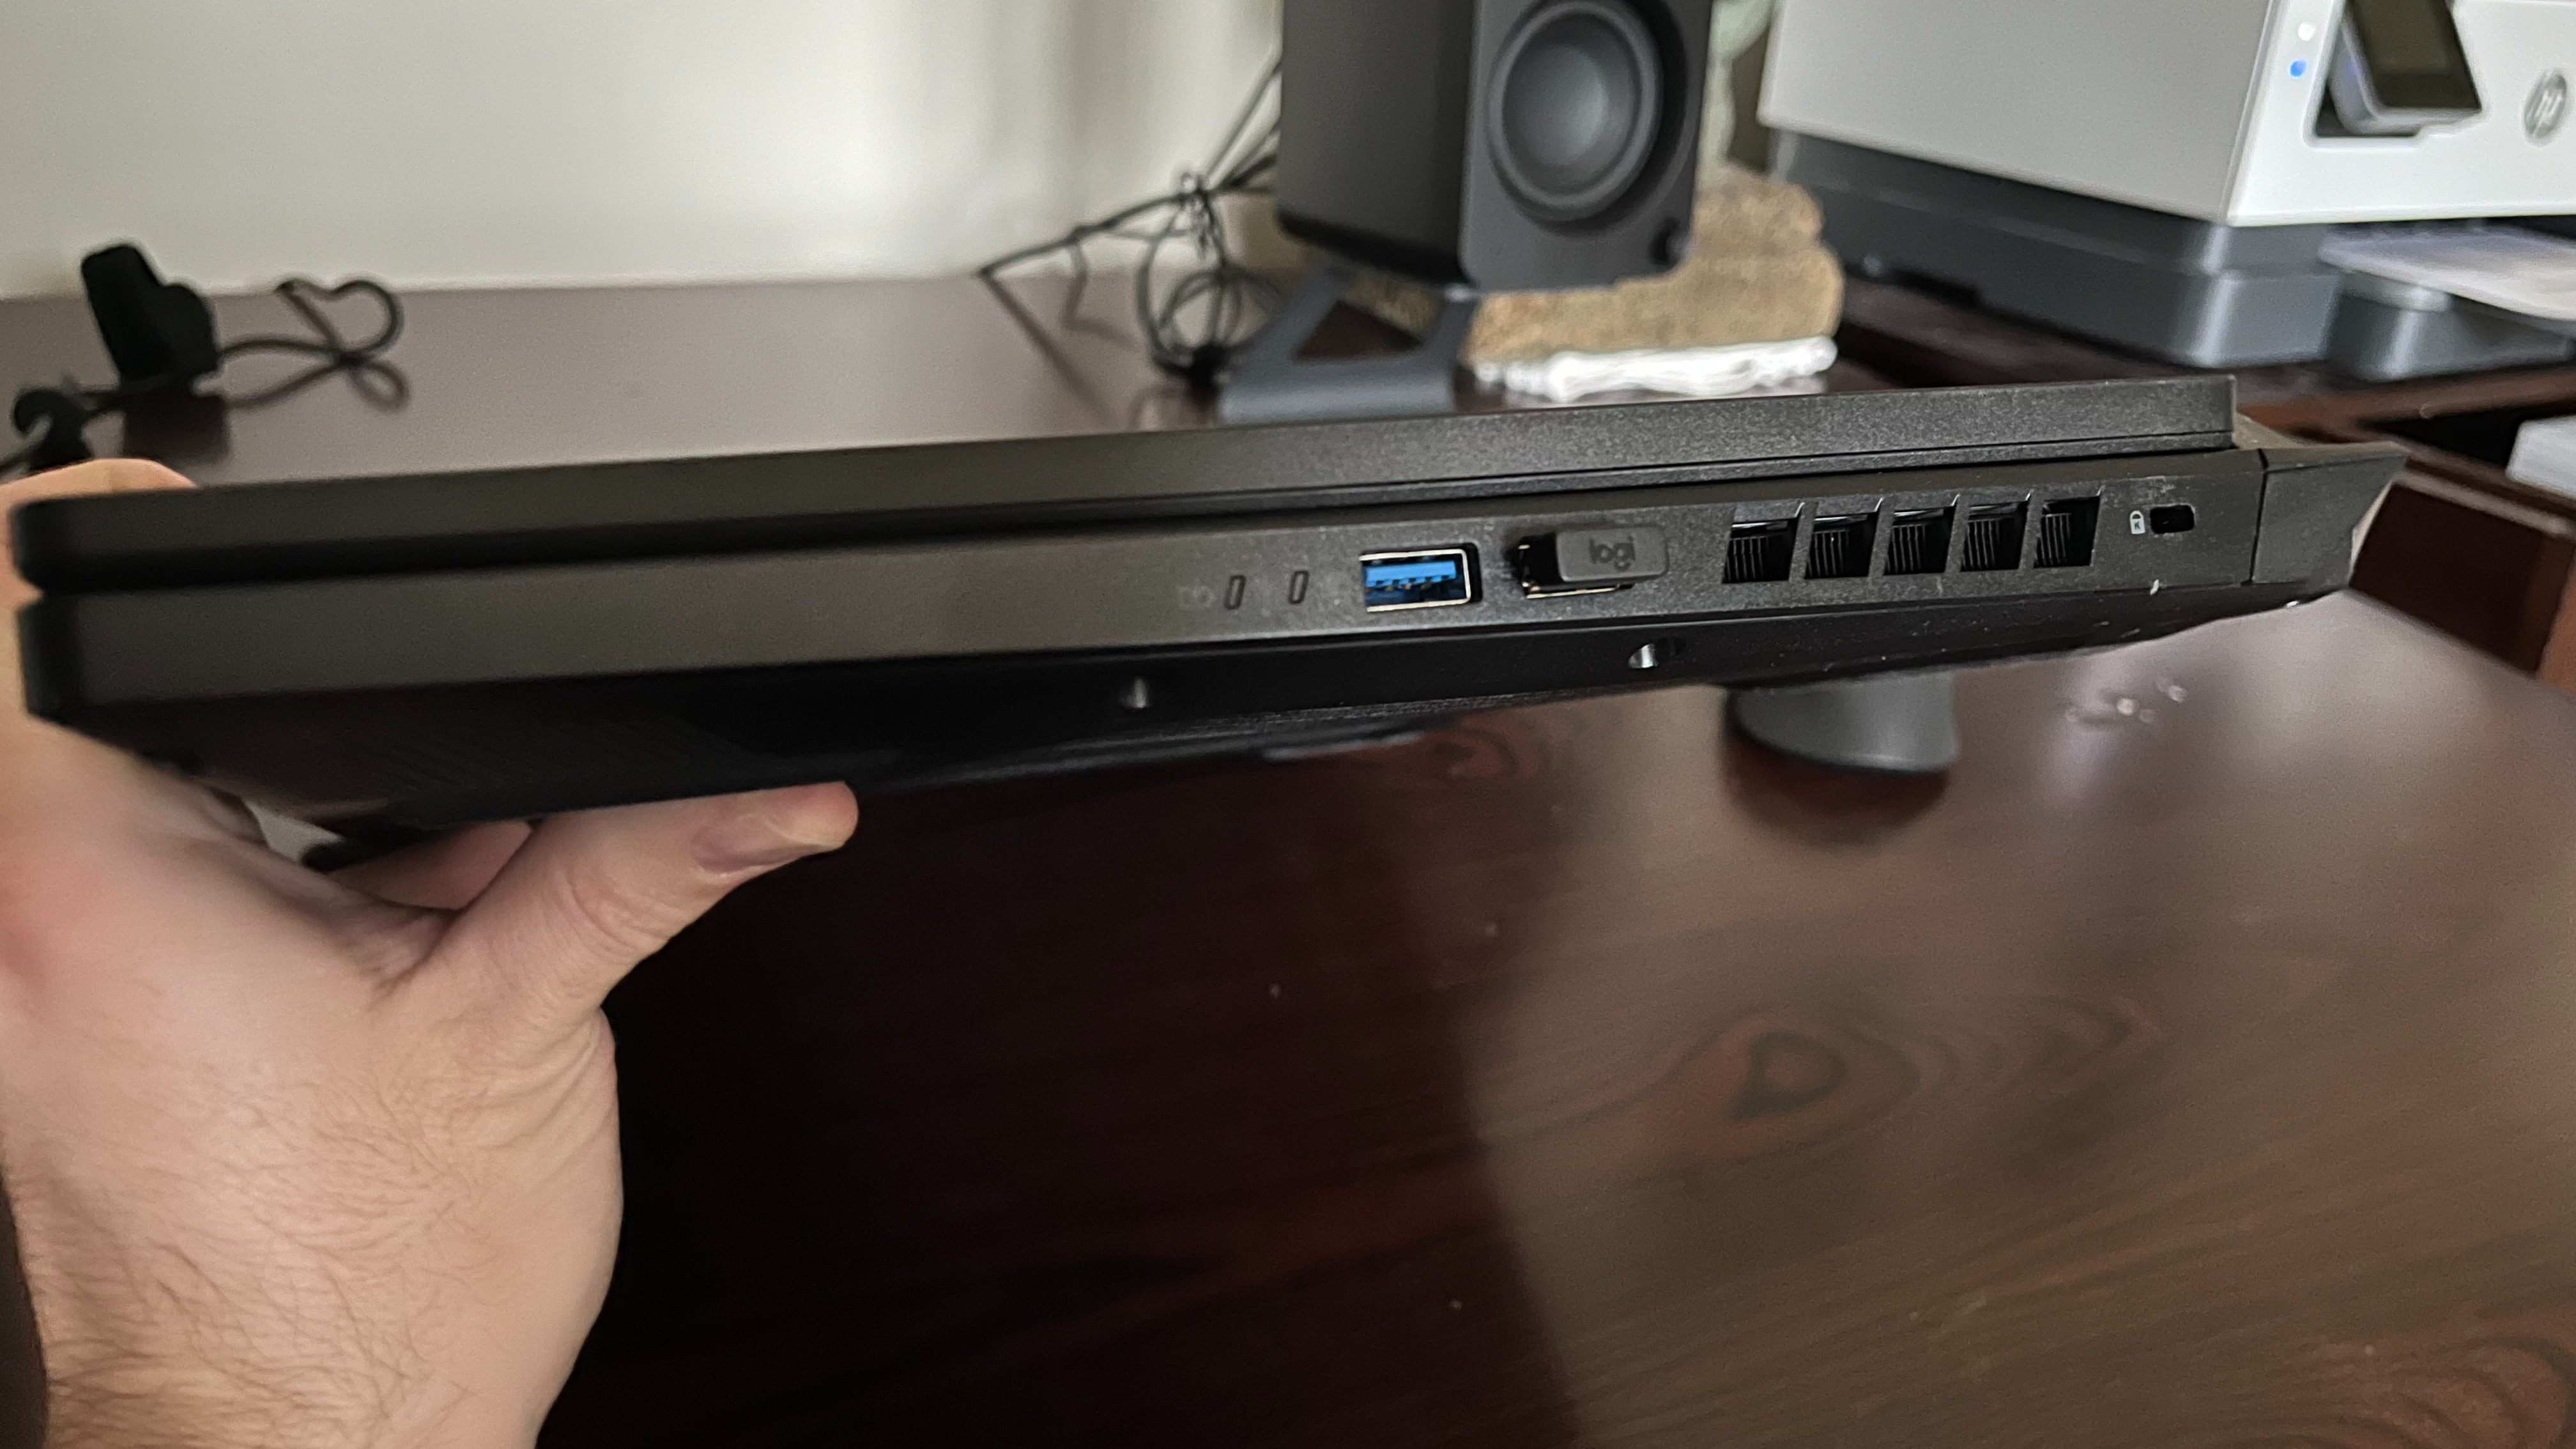 Acer Nitro 16 AMD side view showing ports